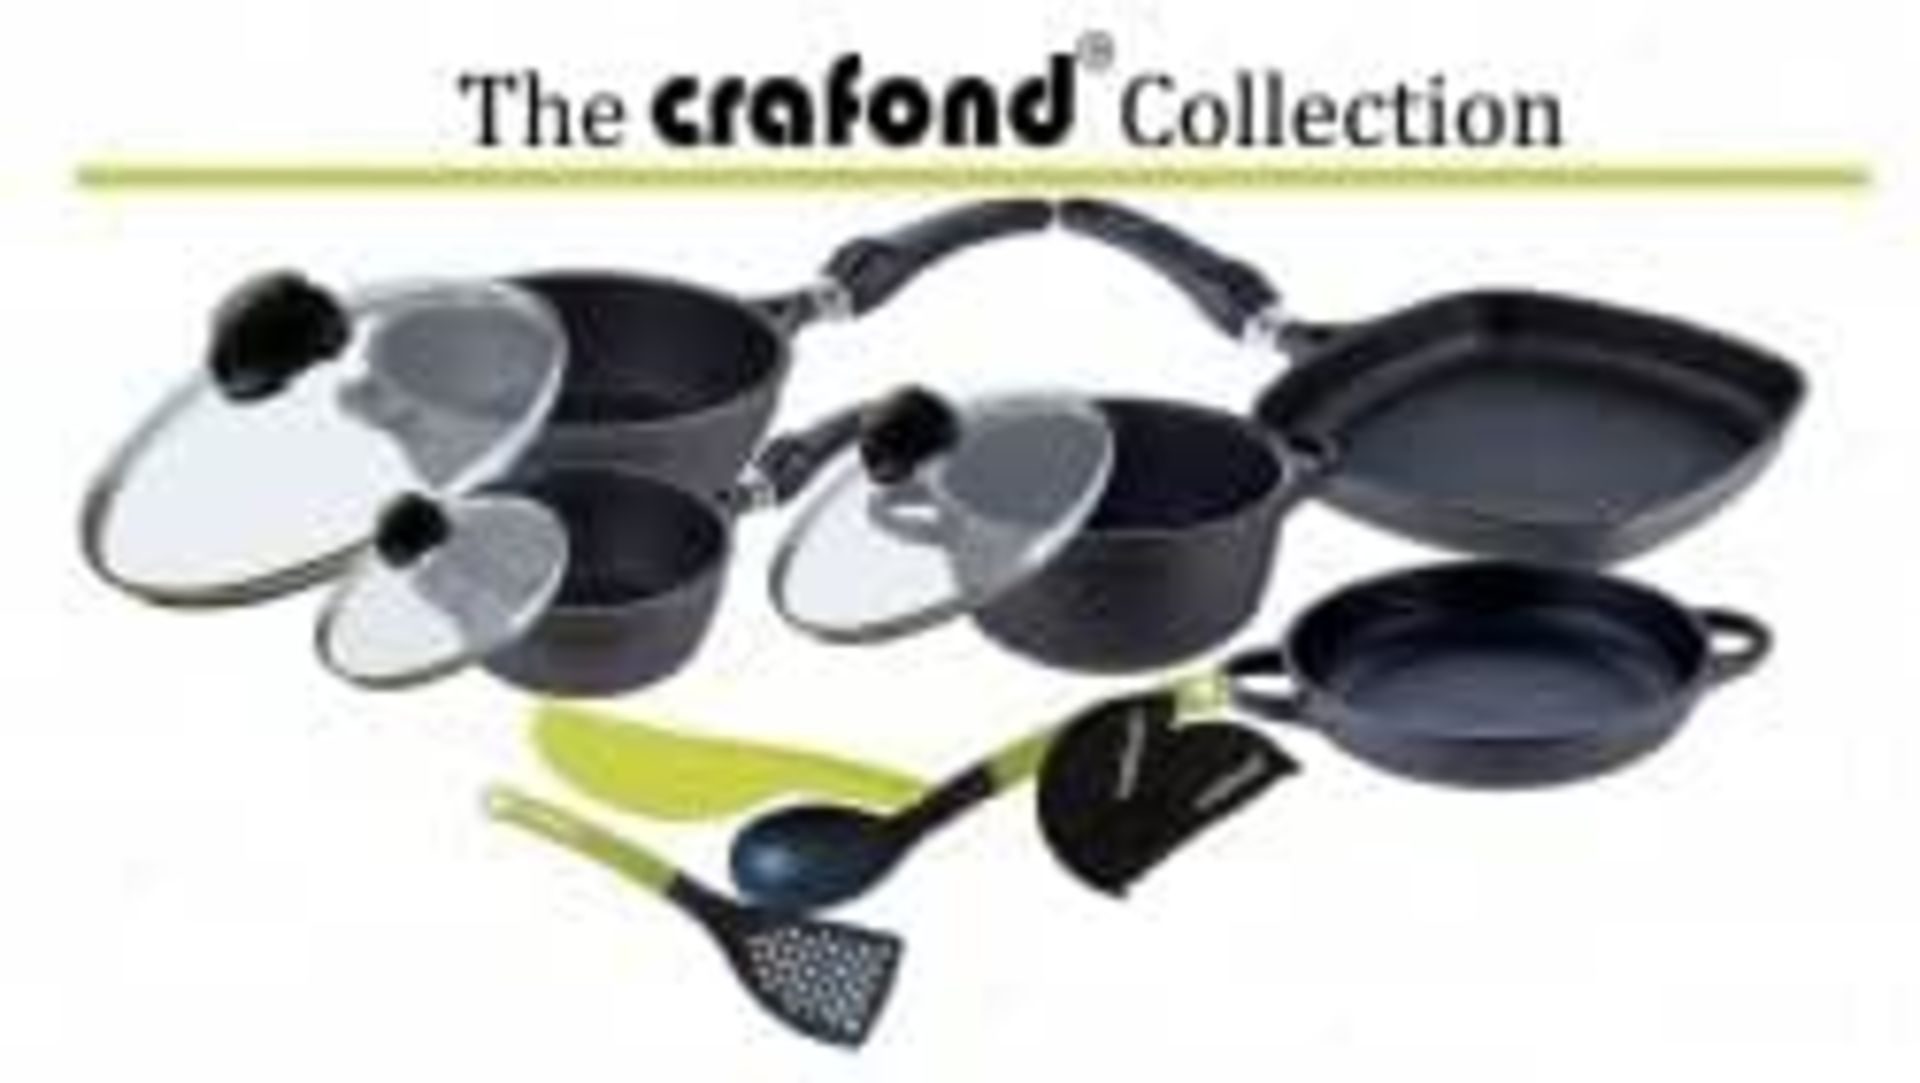 Crafond 18cm Saucepan with fixed handle and lid - Image 2 of 3